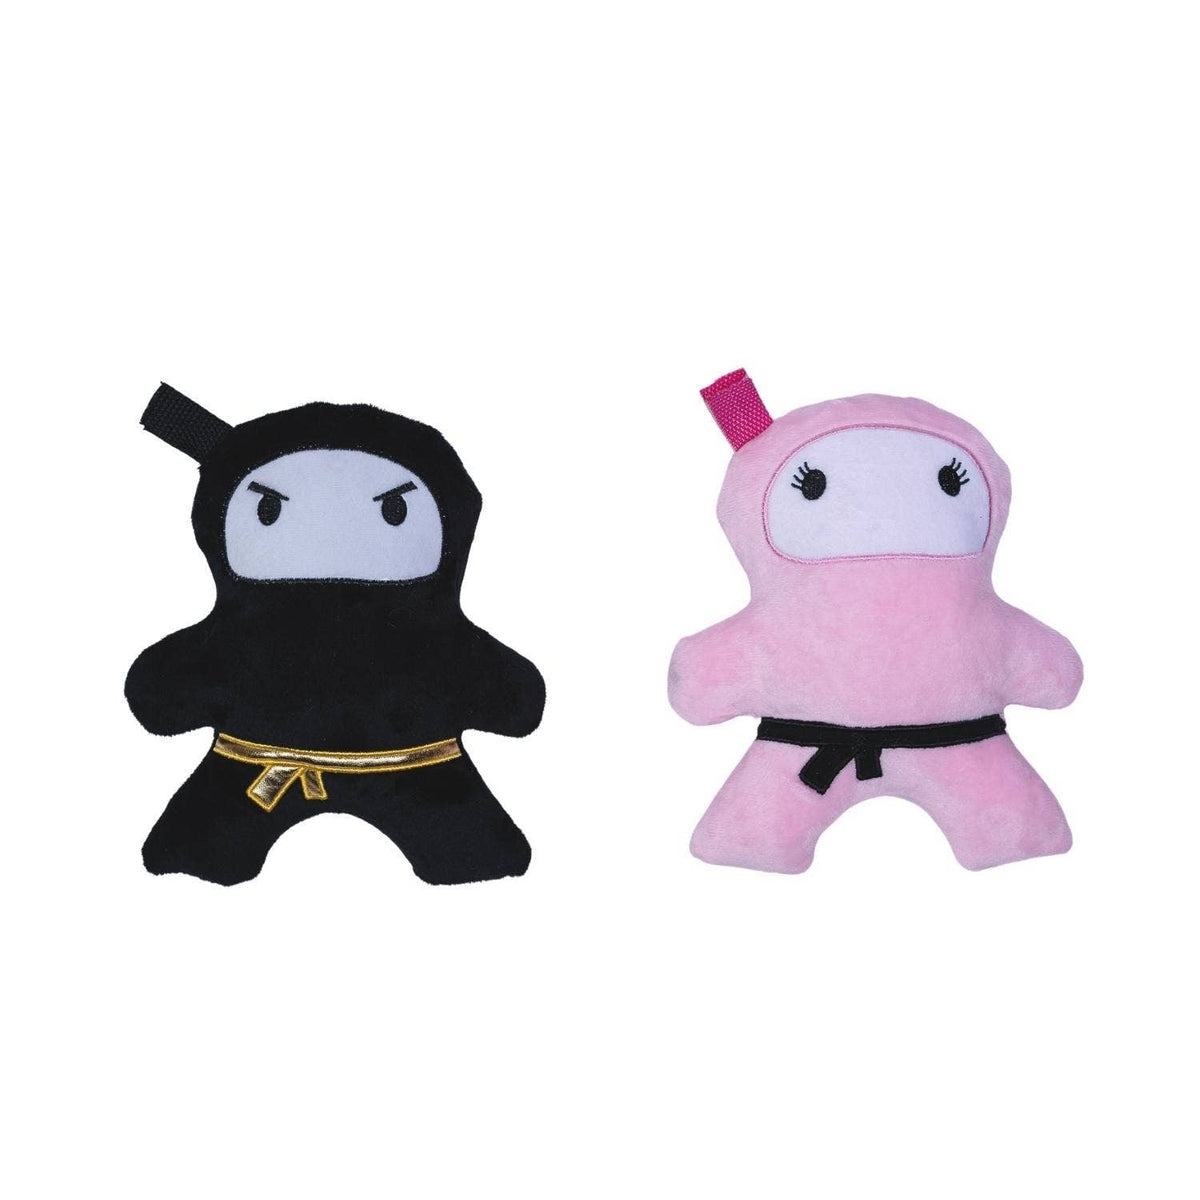 Ninja Love Crinkle and Squeaky Plush Dog Toy Combo by American Pet Supplies